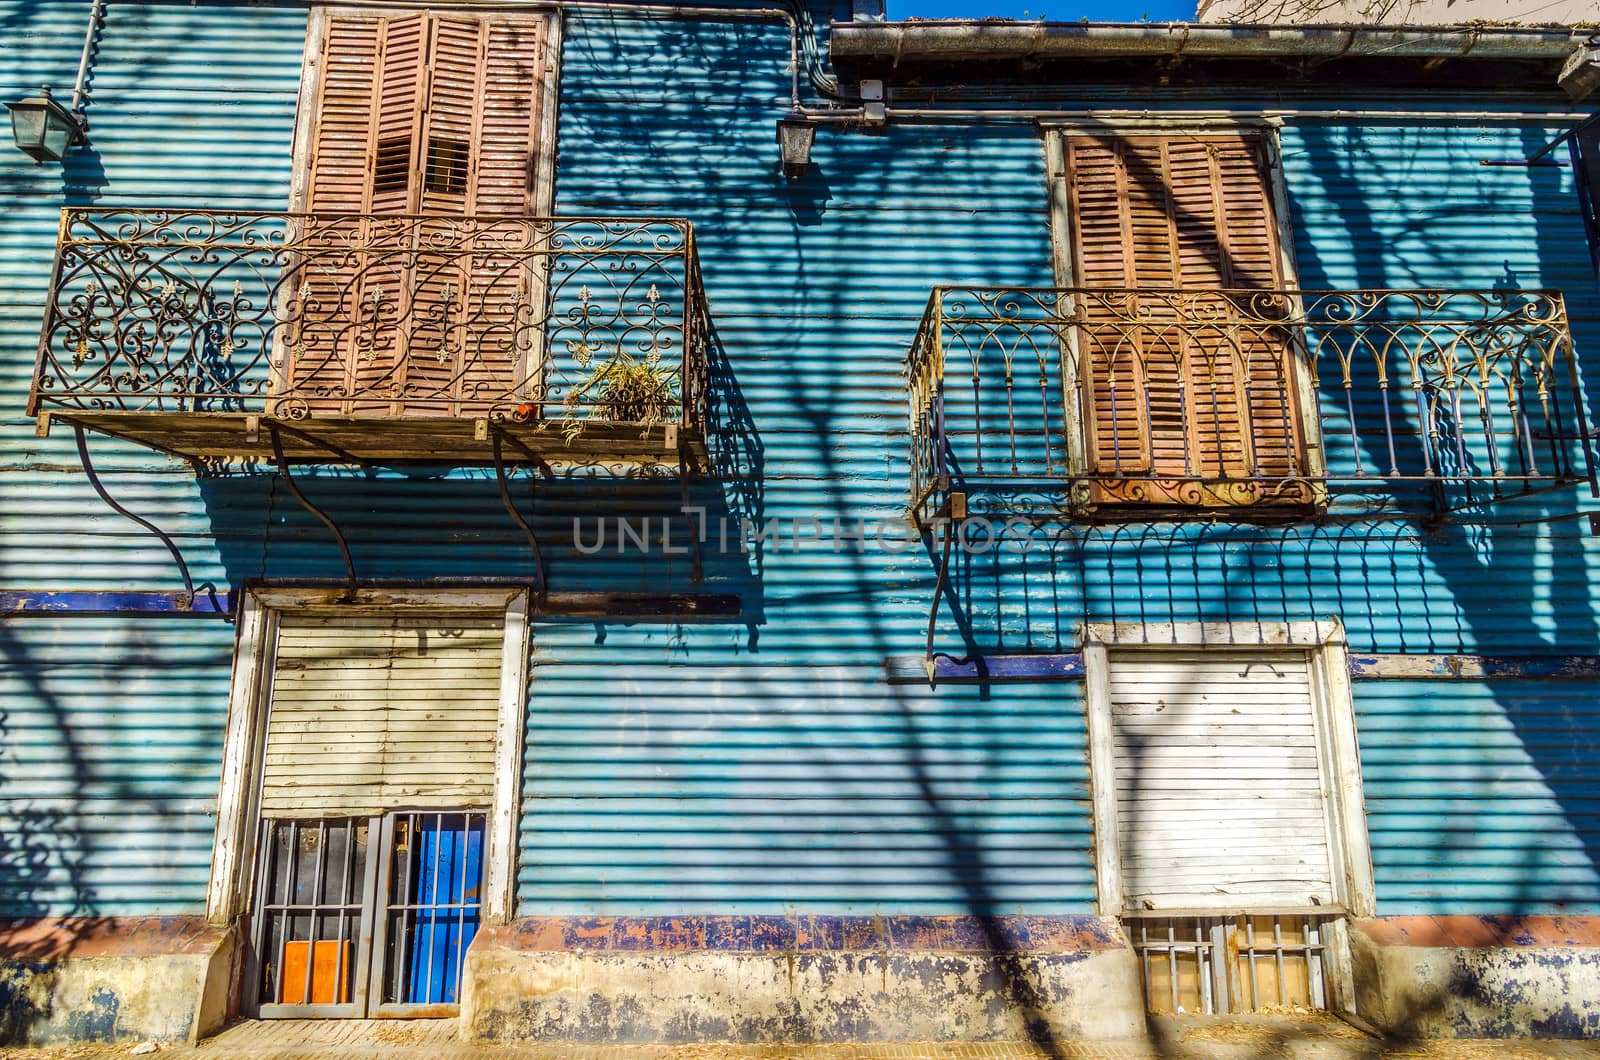 Blue corrugated siding of an old building in La Boca neighborhood of Buenos Aires, Argentina